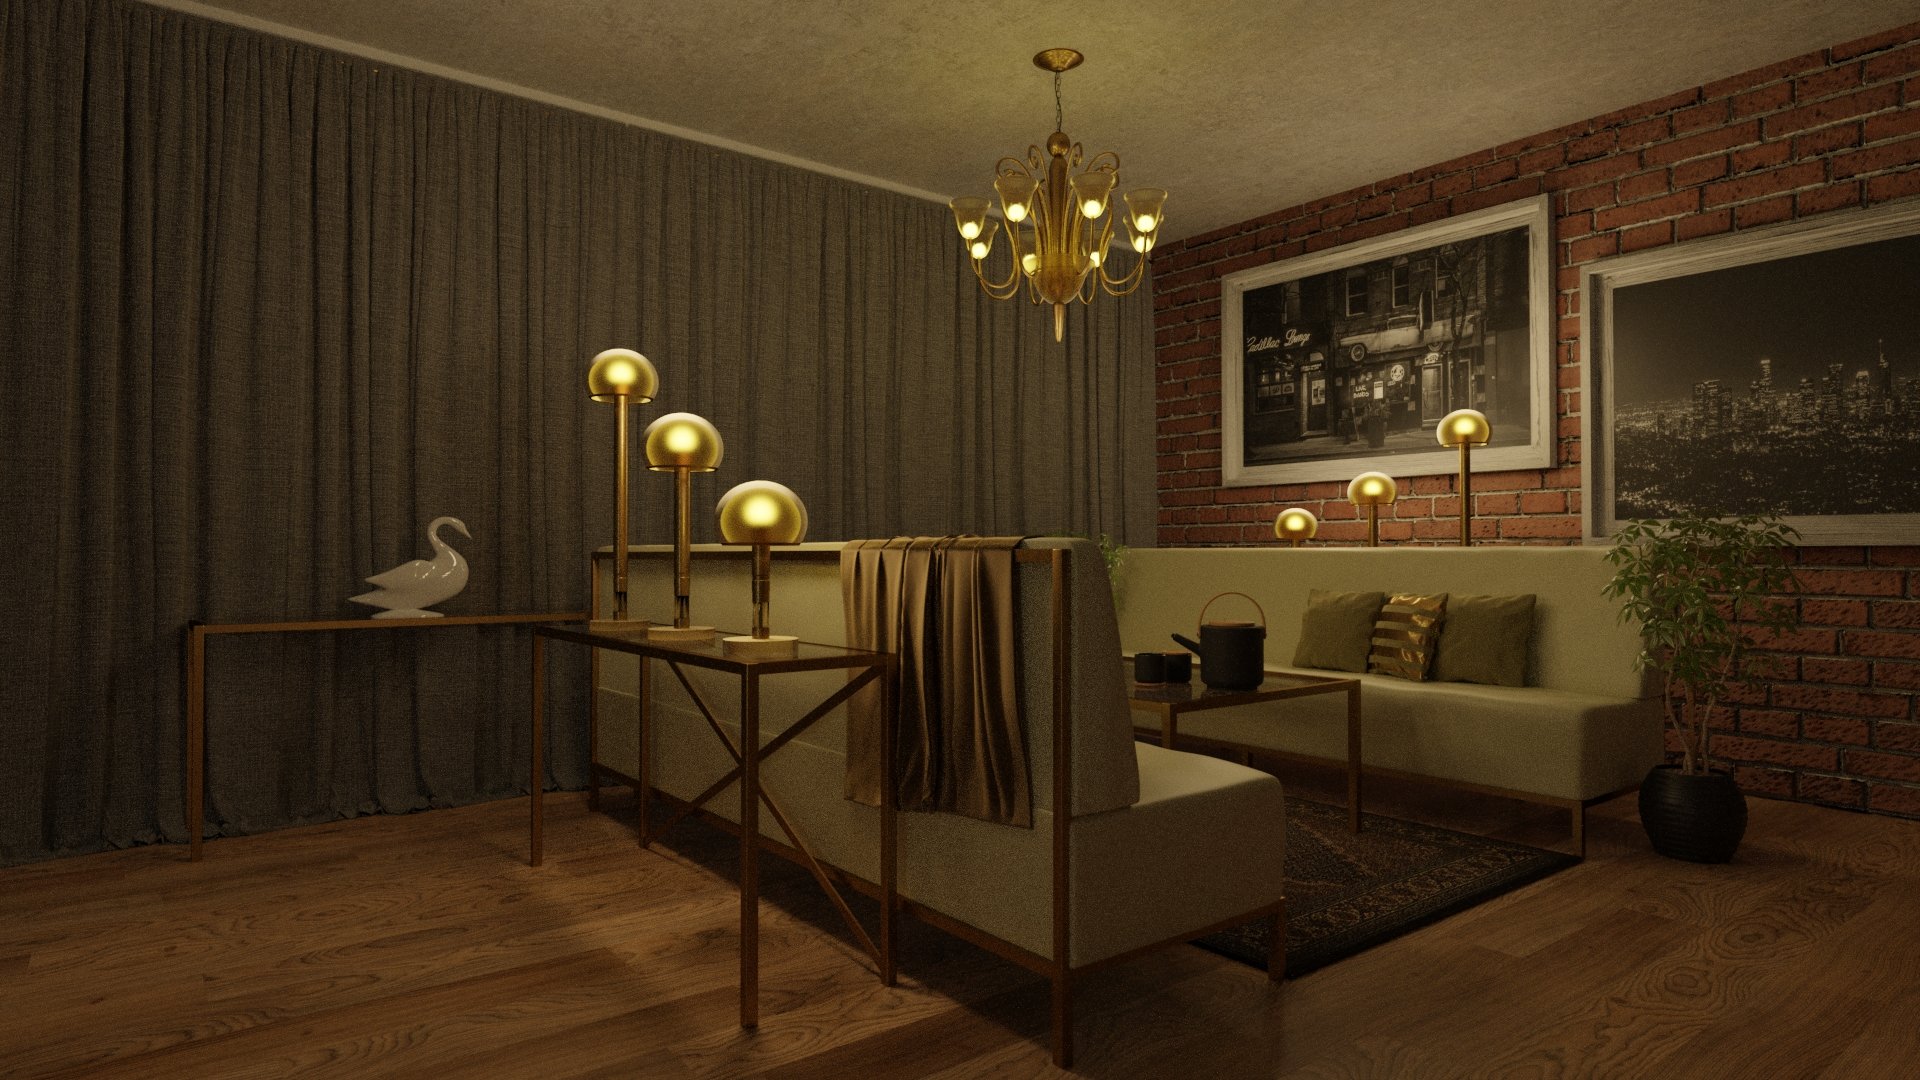 Emerald Room by: Illumination, 3D Models by Daz 3D